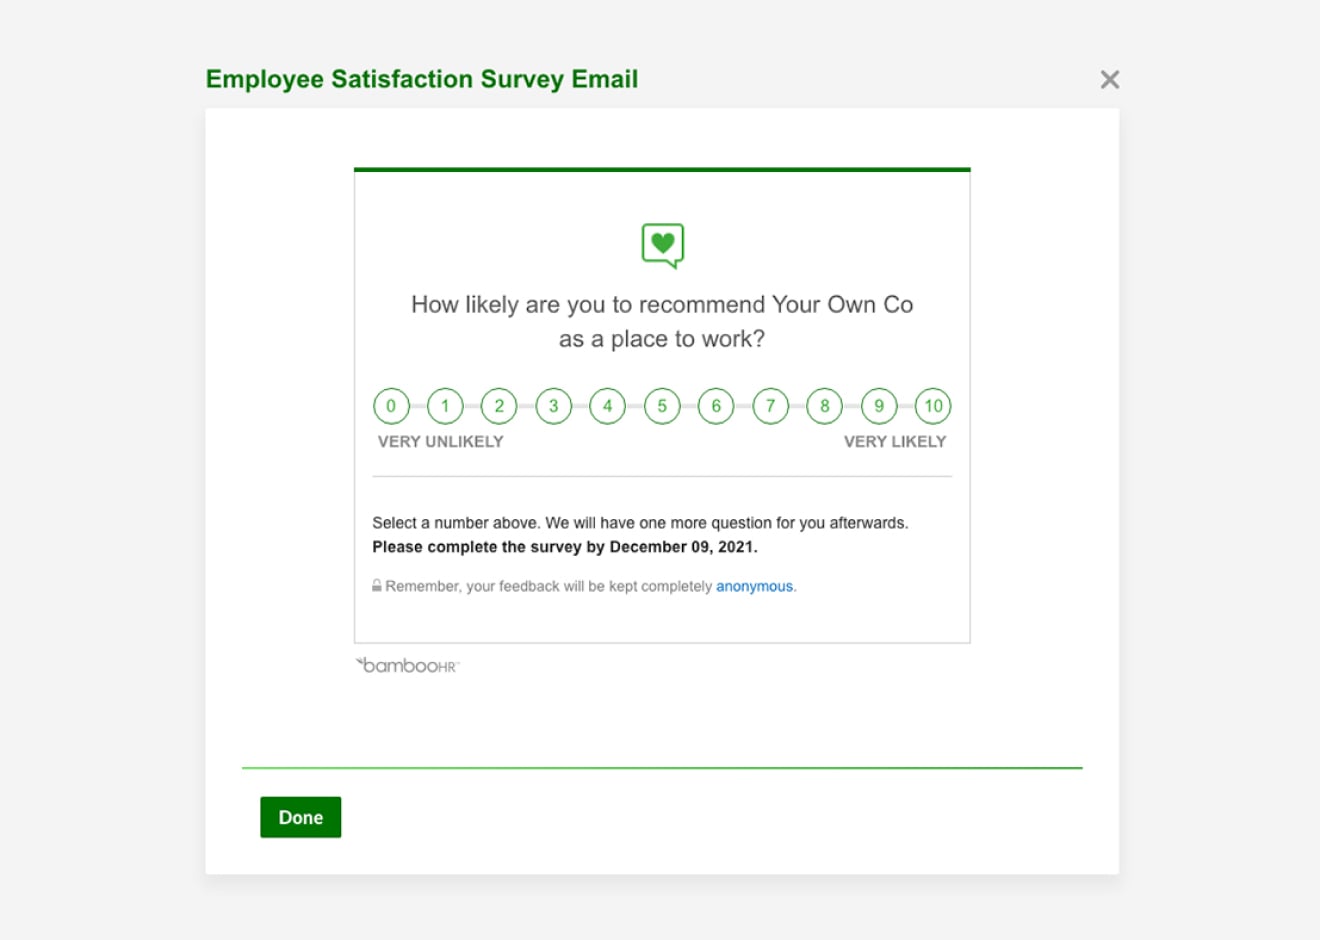 Refine your employees’ experience with actionable feedback.